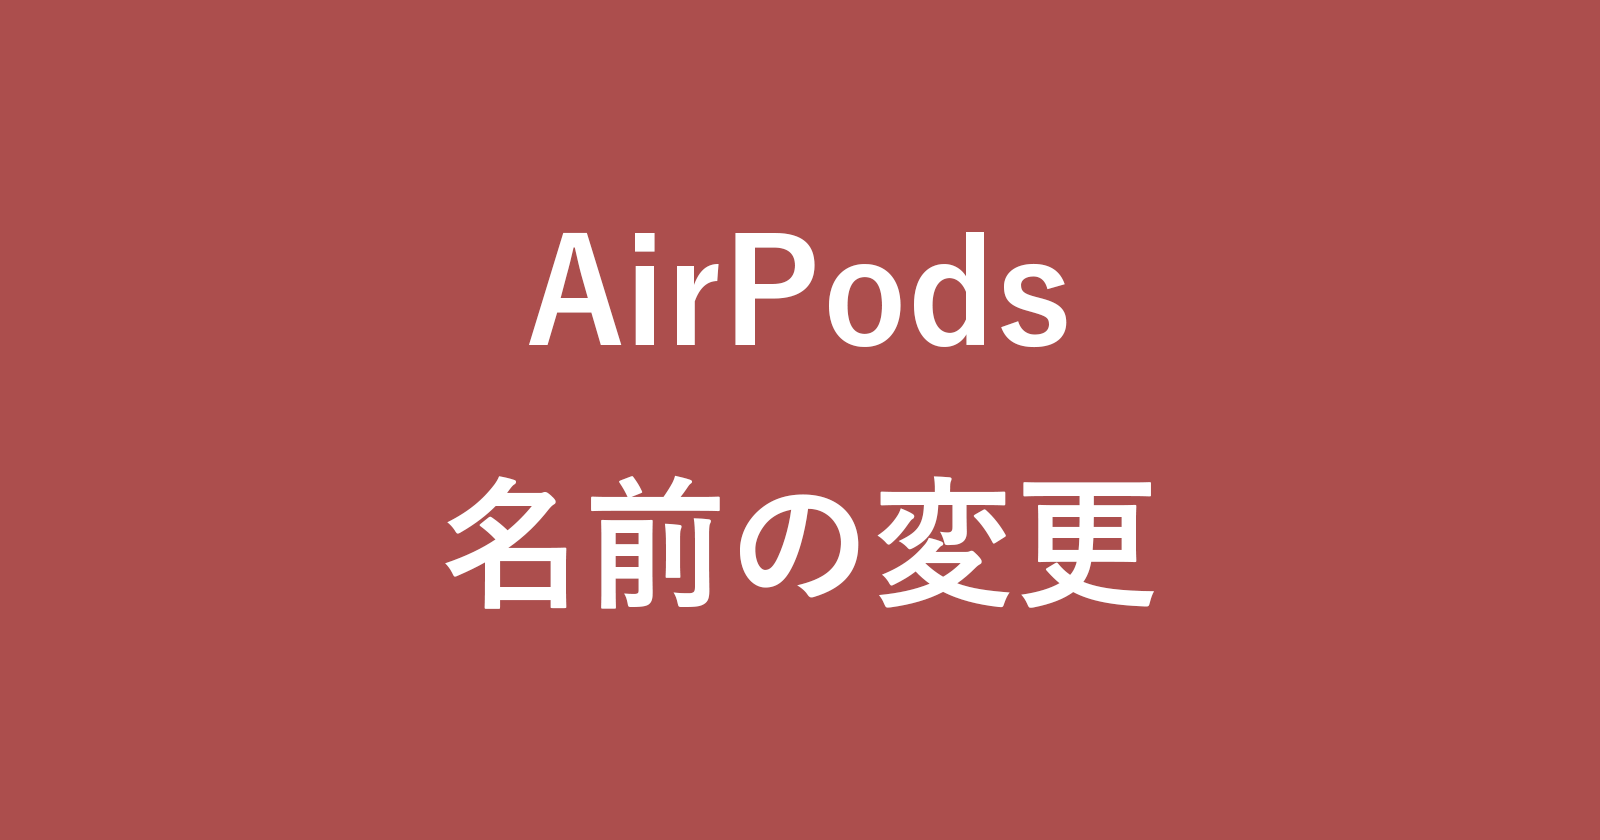 airpods change name